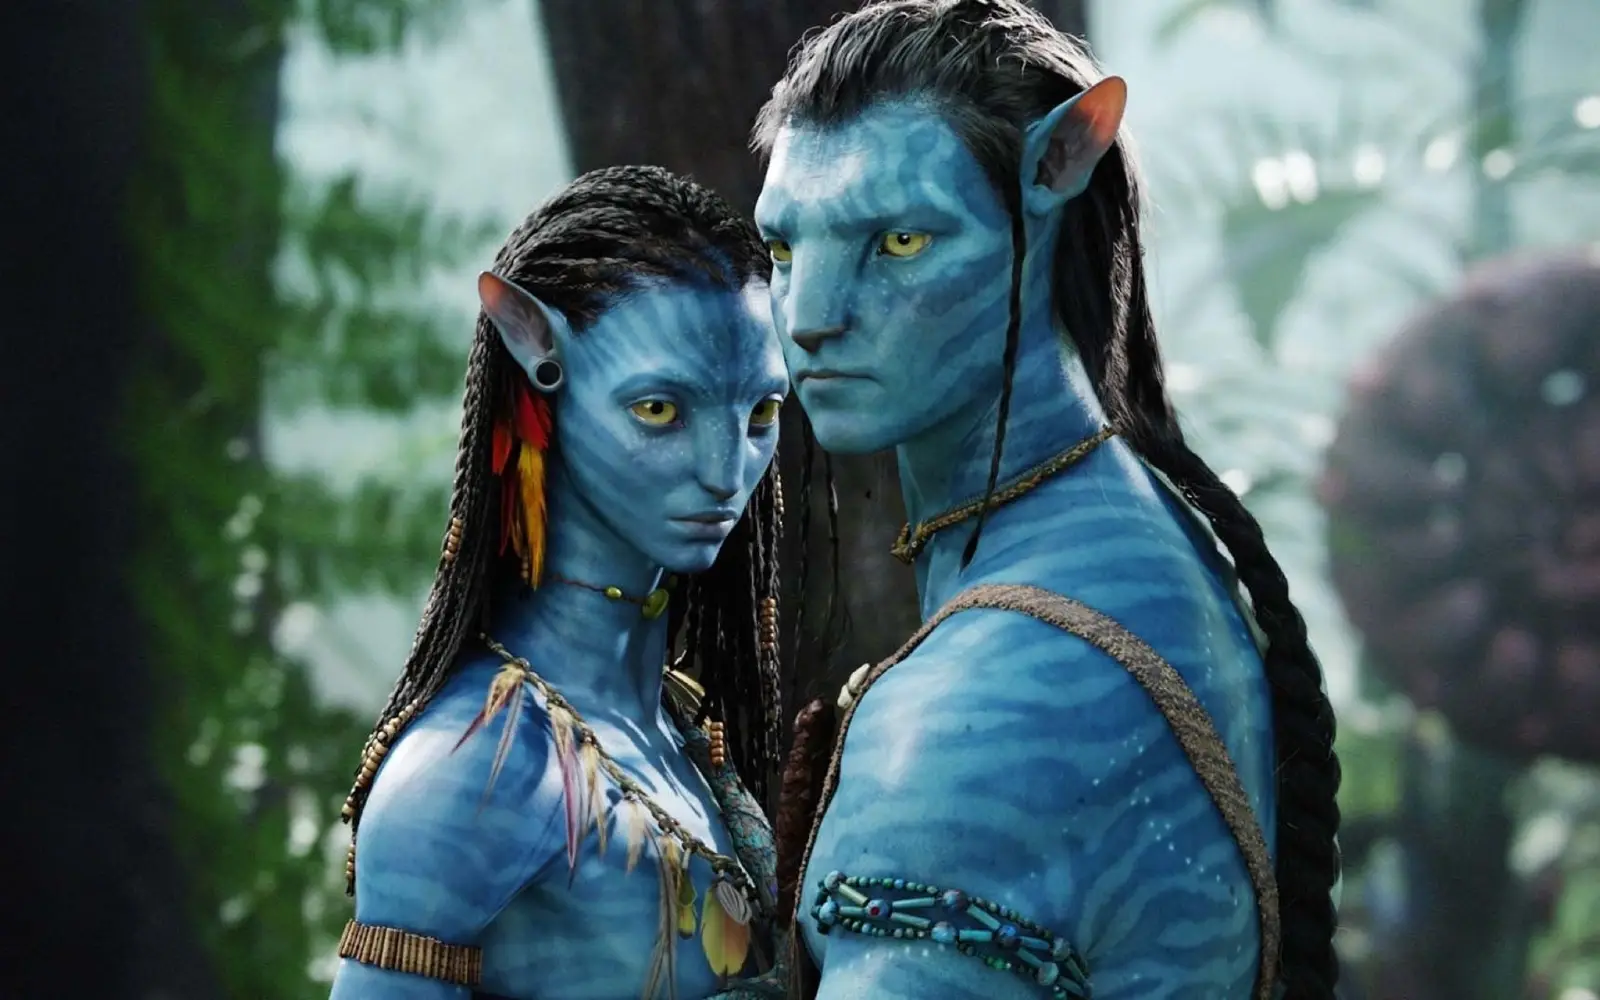 Avatar re-release earns ₹1 crore in advance bookings in India, targets $15-20 million opening globally